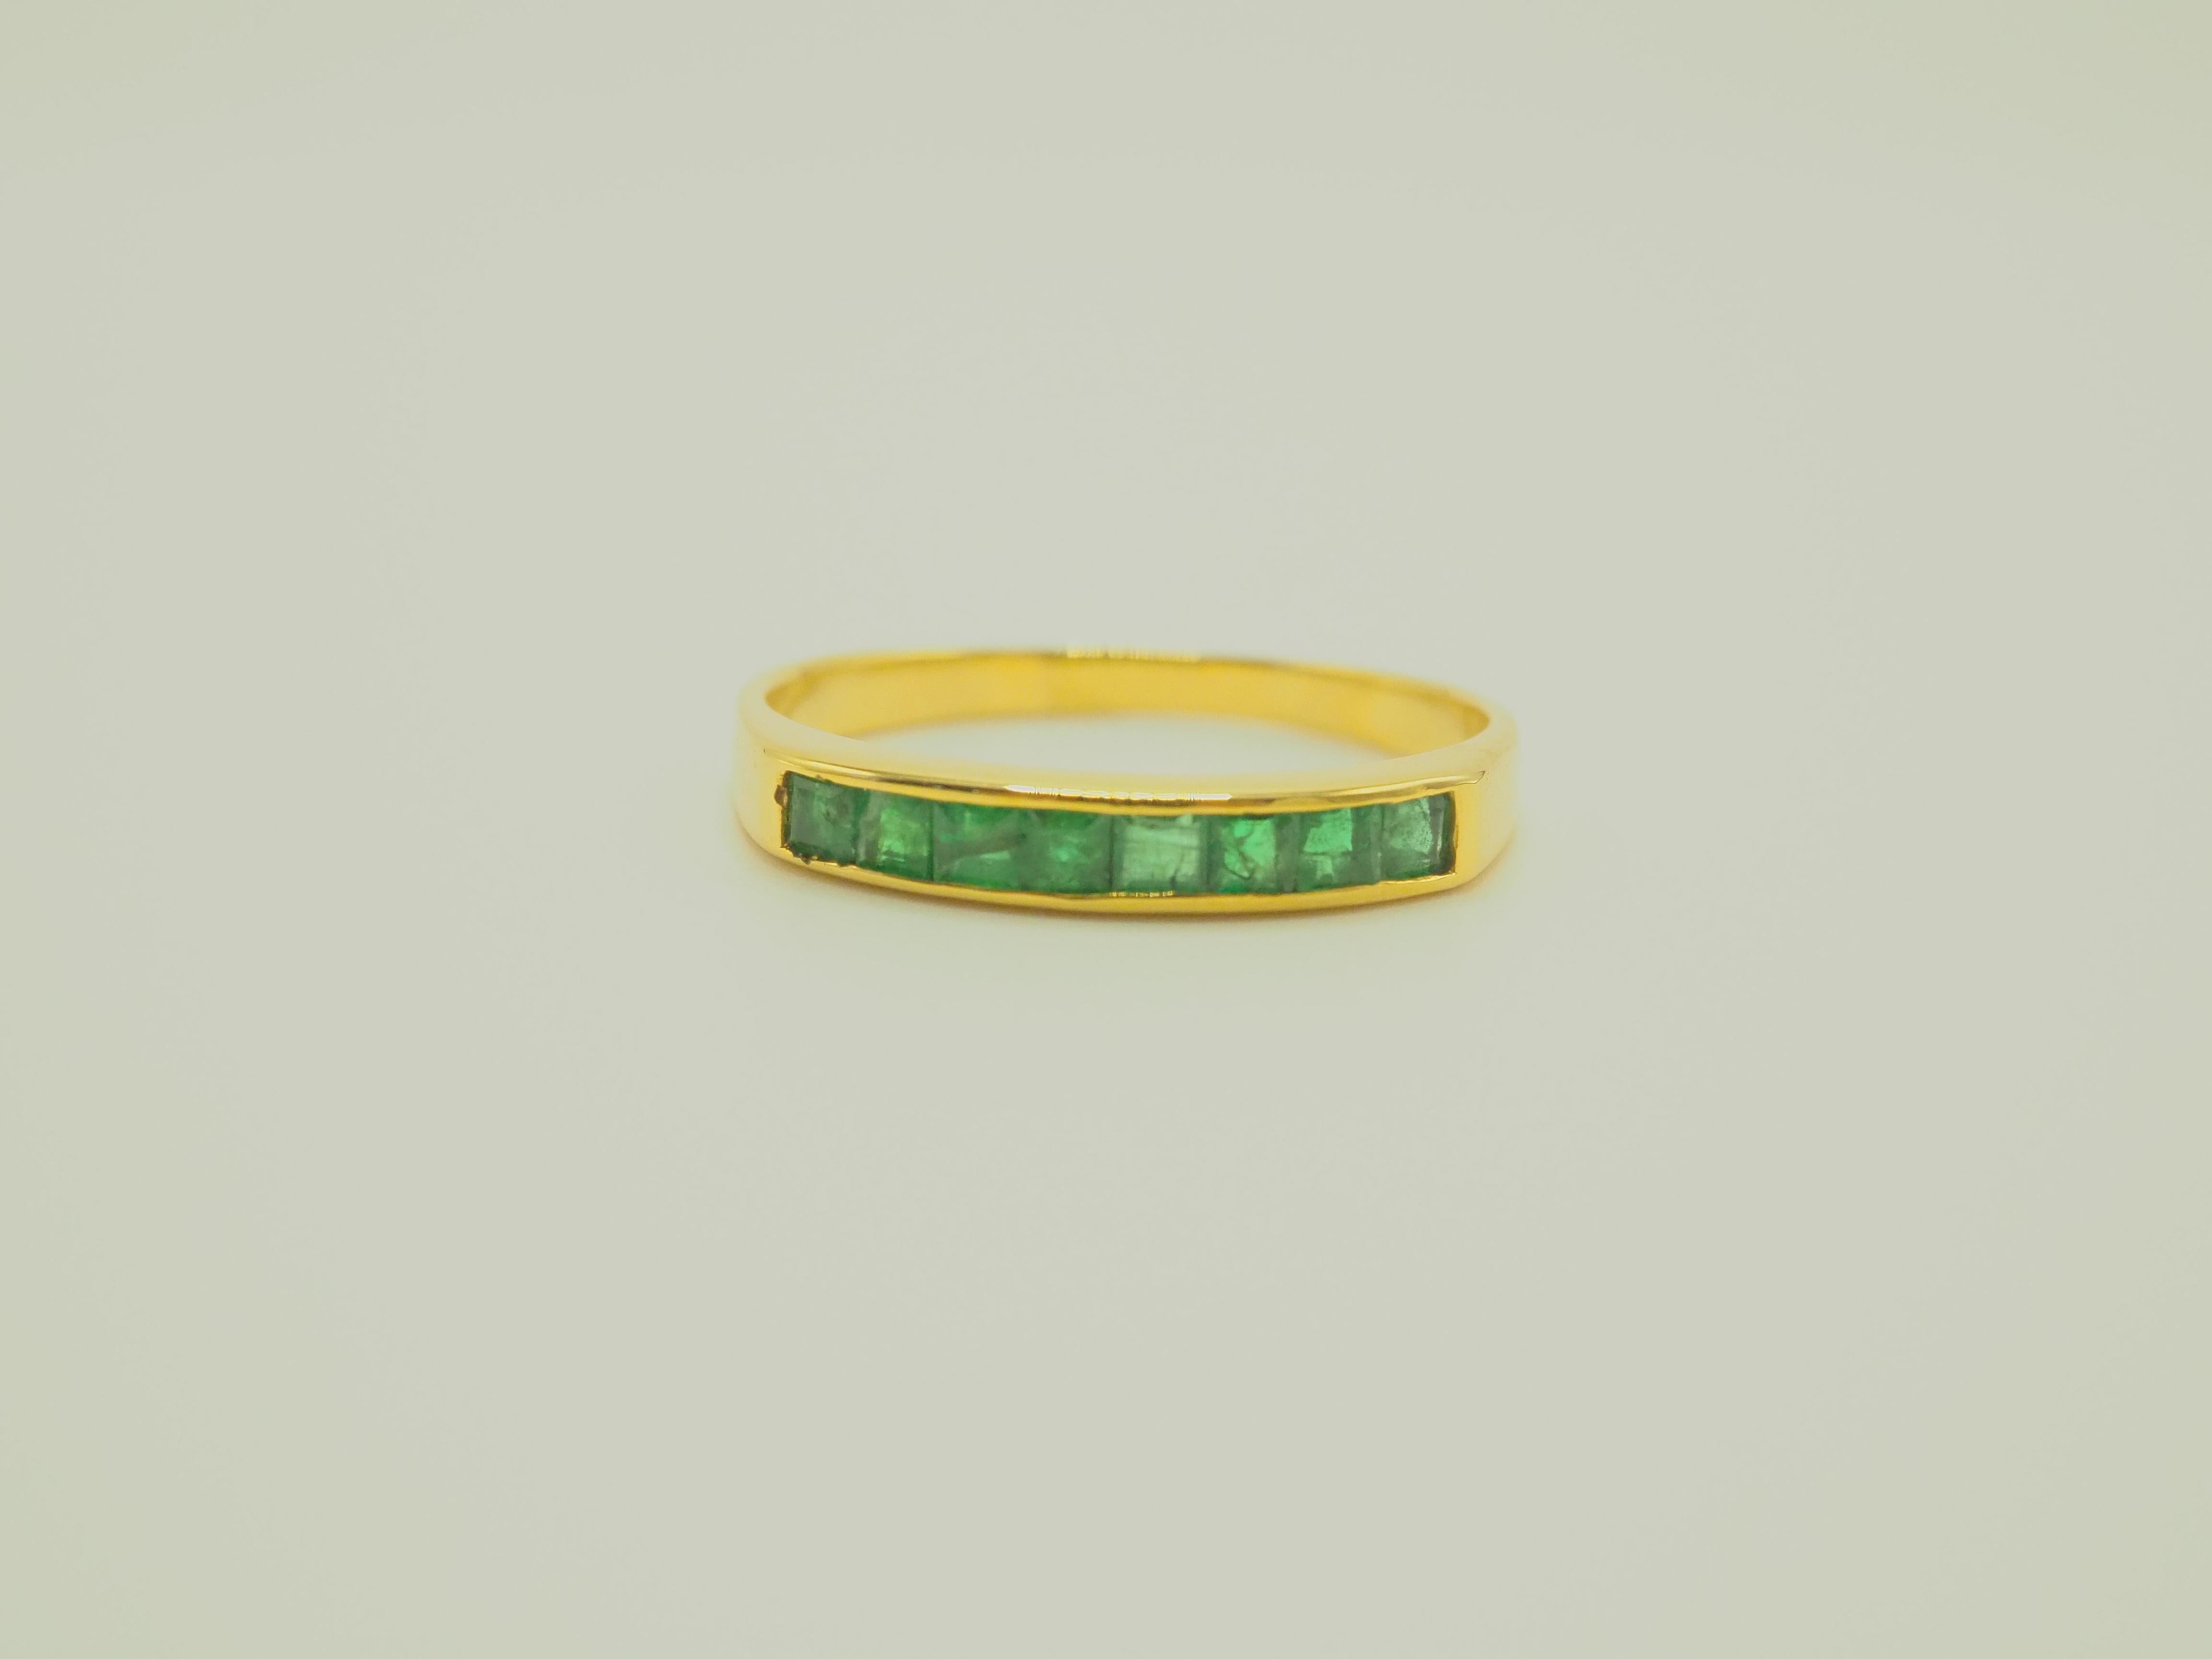 A gorgeous luxury Neo-vintage band ring that is both suitable for all sexes. This ring has 8 beautiful highly saturated green color emeralds and are channeled nicely into the band. The ring is made using 14k solid yellow gold. This ring is perfect